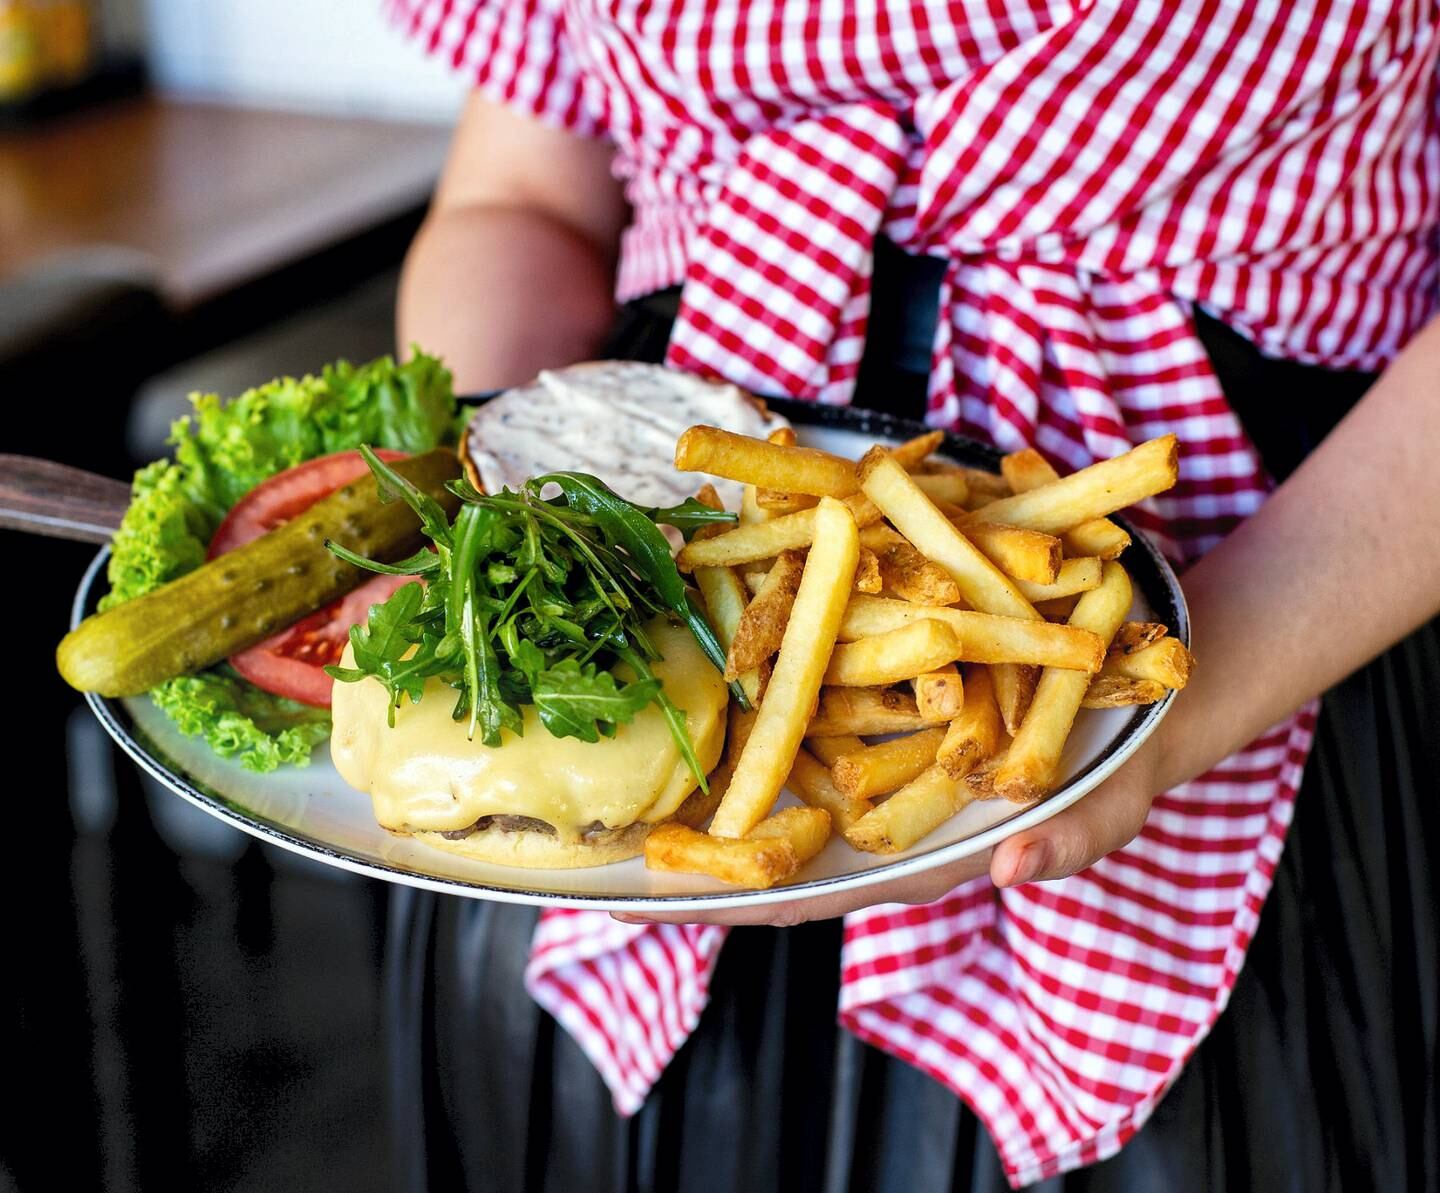 Black Tap offers a variety of burgers, from beef to chicken and a vegan option. Photo: Black Tap 